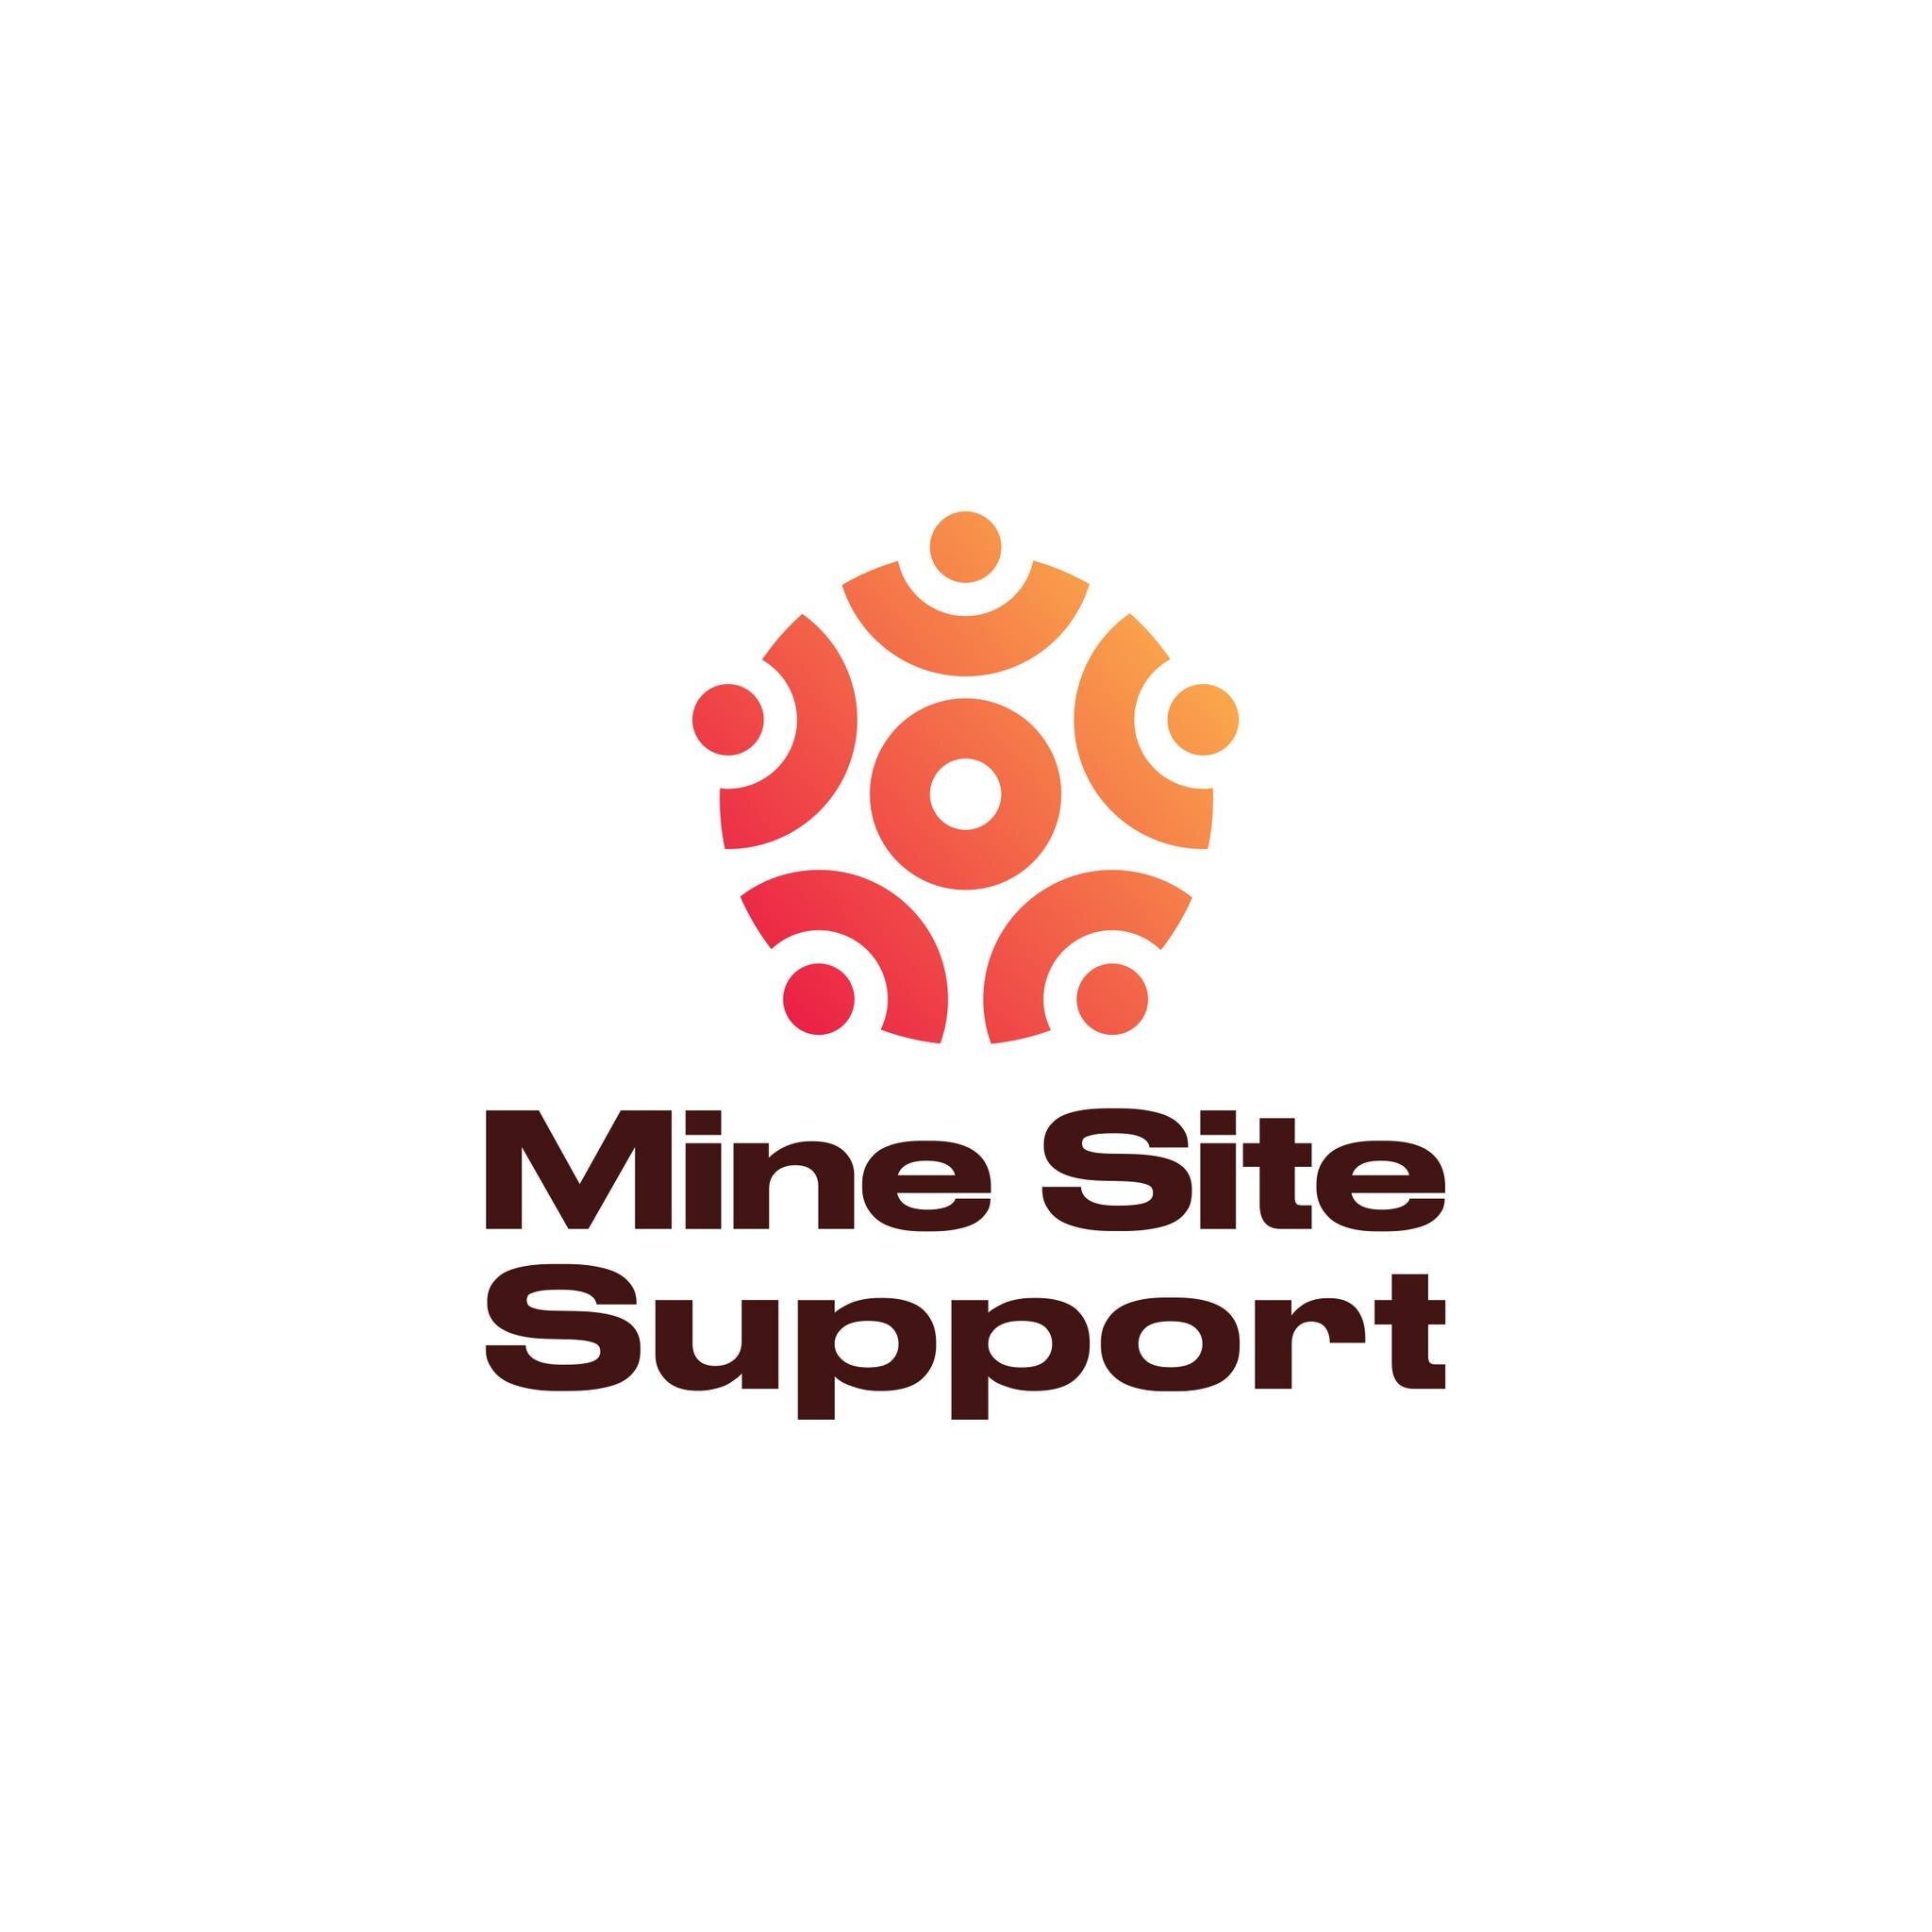 Brand identity designed for Mine Site Support, an indigenous-owned and operated business providing safety and operational services for tier 1 mining companies and contractors in West Australia.
&bull;
&bull;
&bull;
&bull;
#branding #graphicdesign #gr